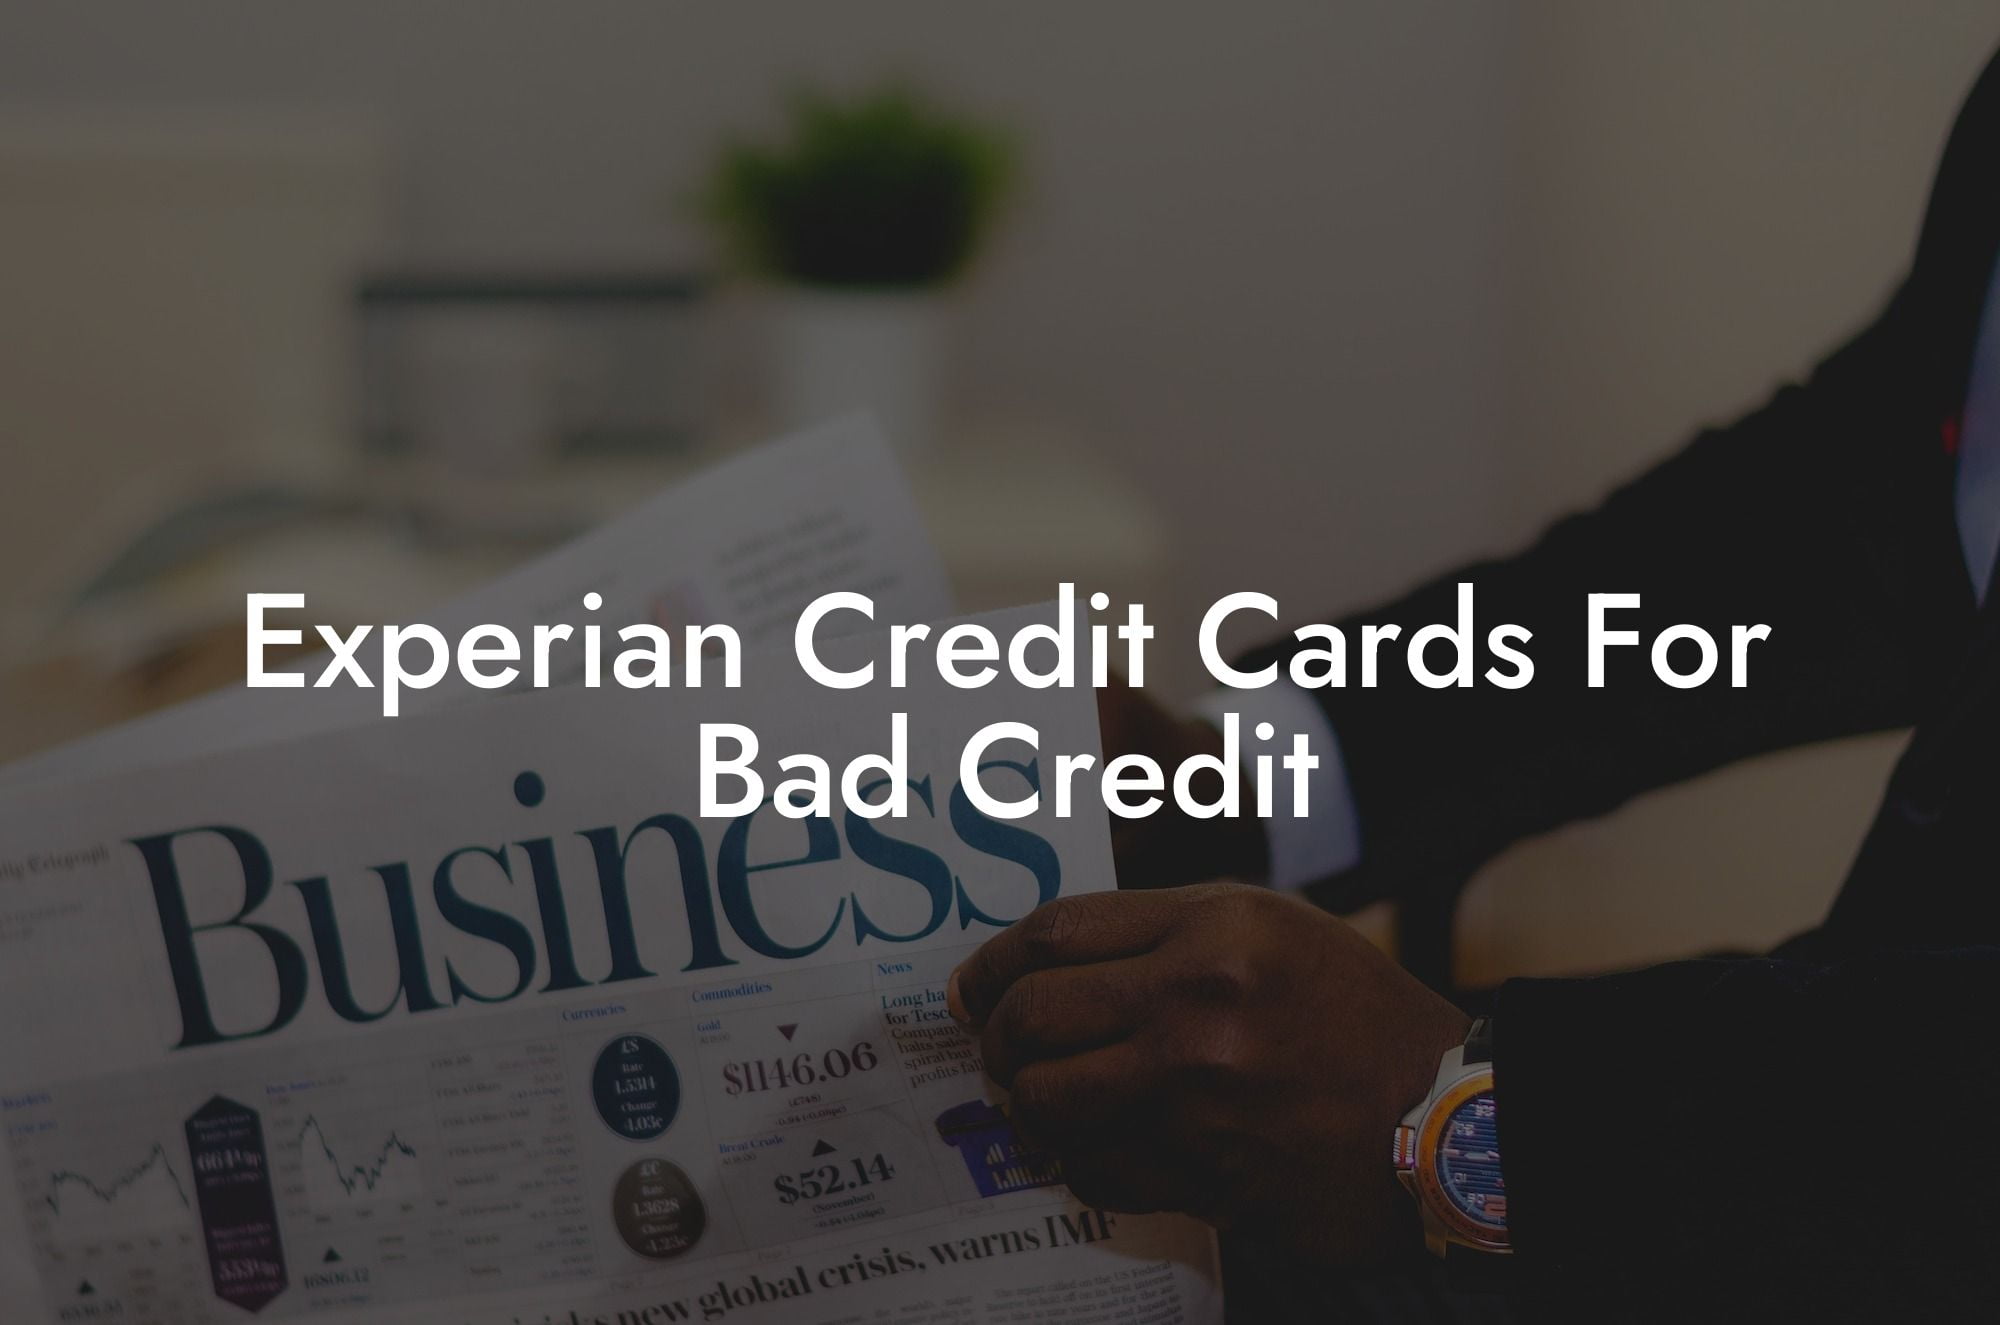 Experian Credit Cards For Bad Credit